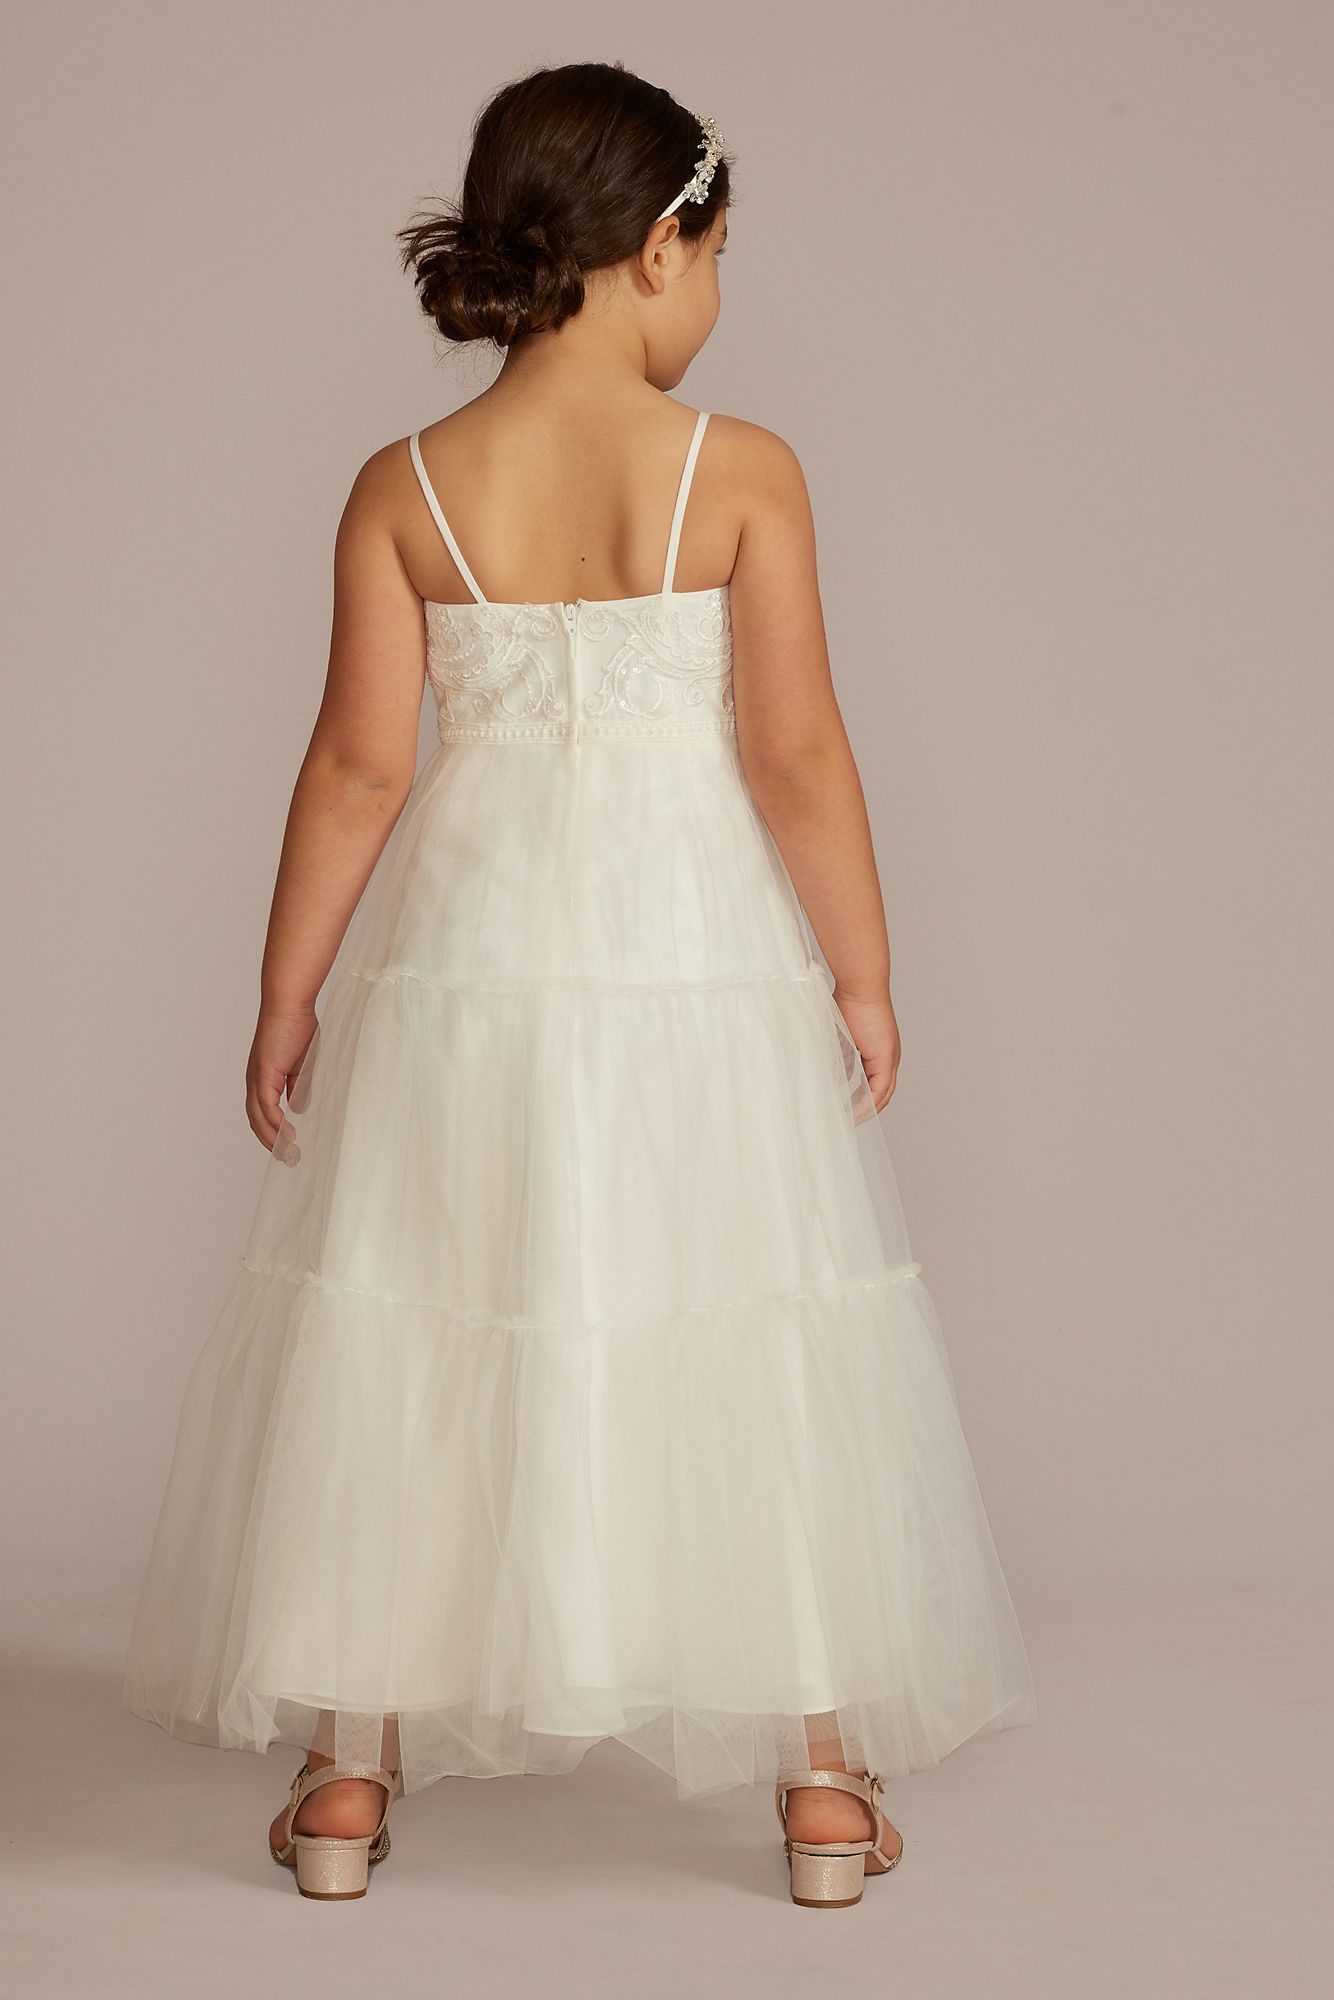 Lace and Tulle Spaghetti Strap Flower Girl Dress DB Studio WG1447